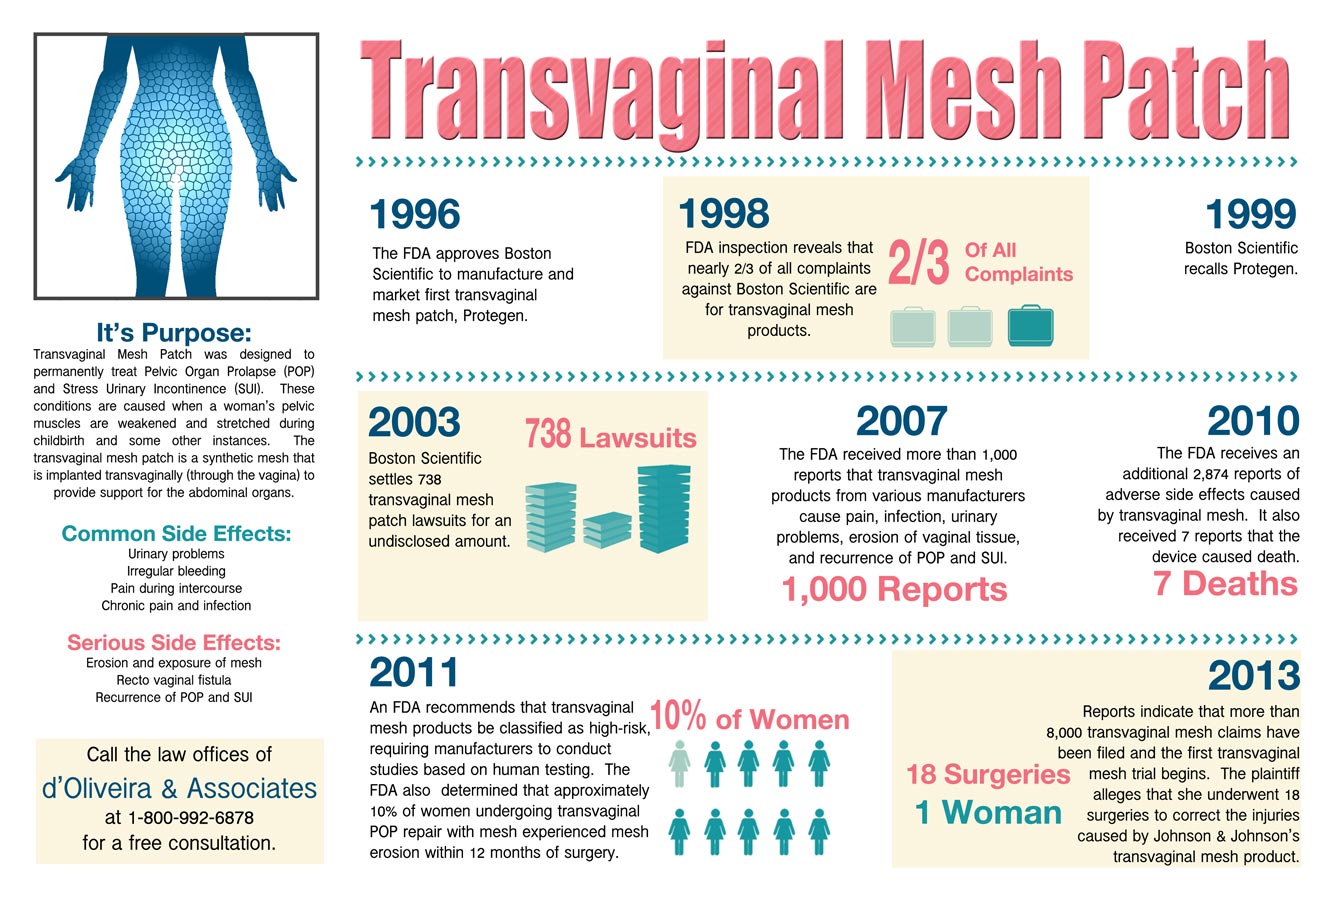 Transvaginal Mesh Patch and Common Side Effects Infographic